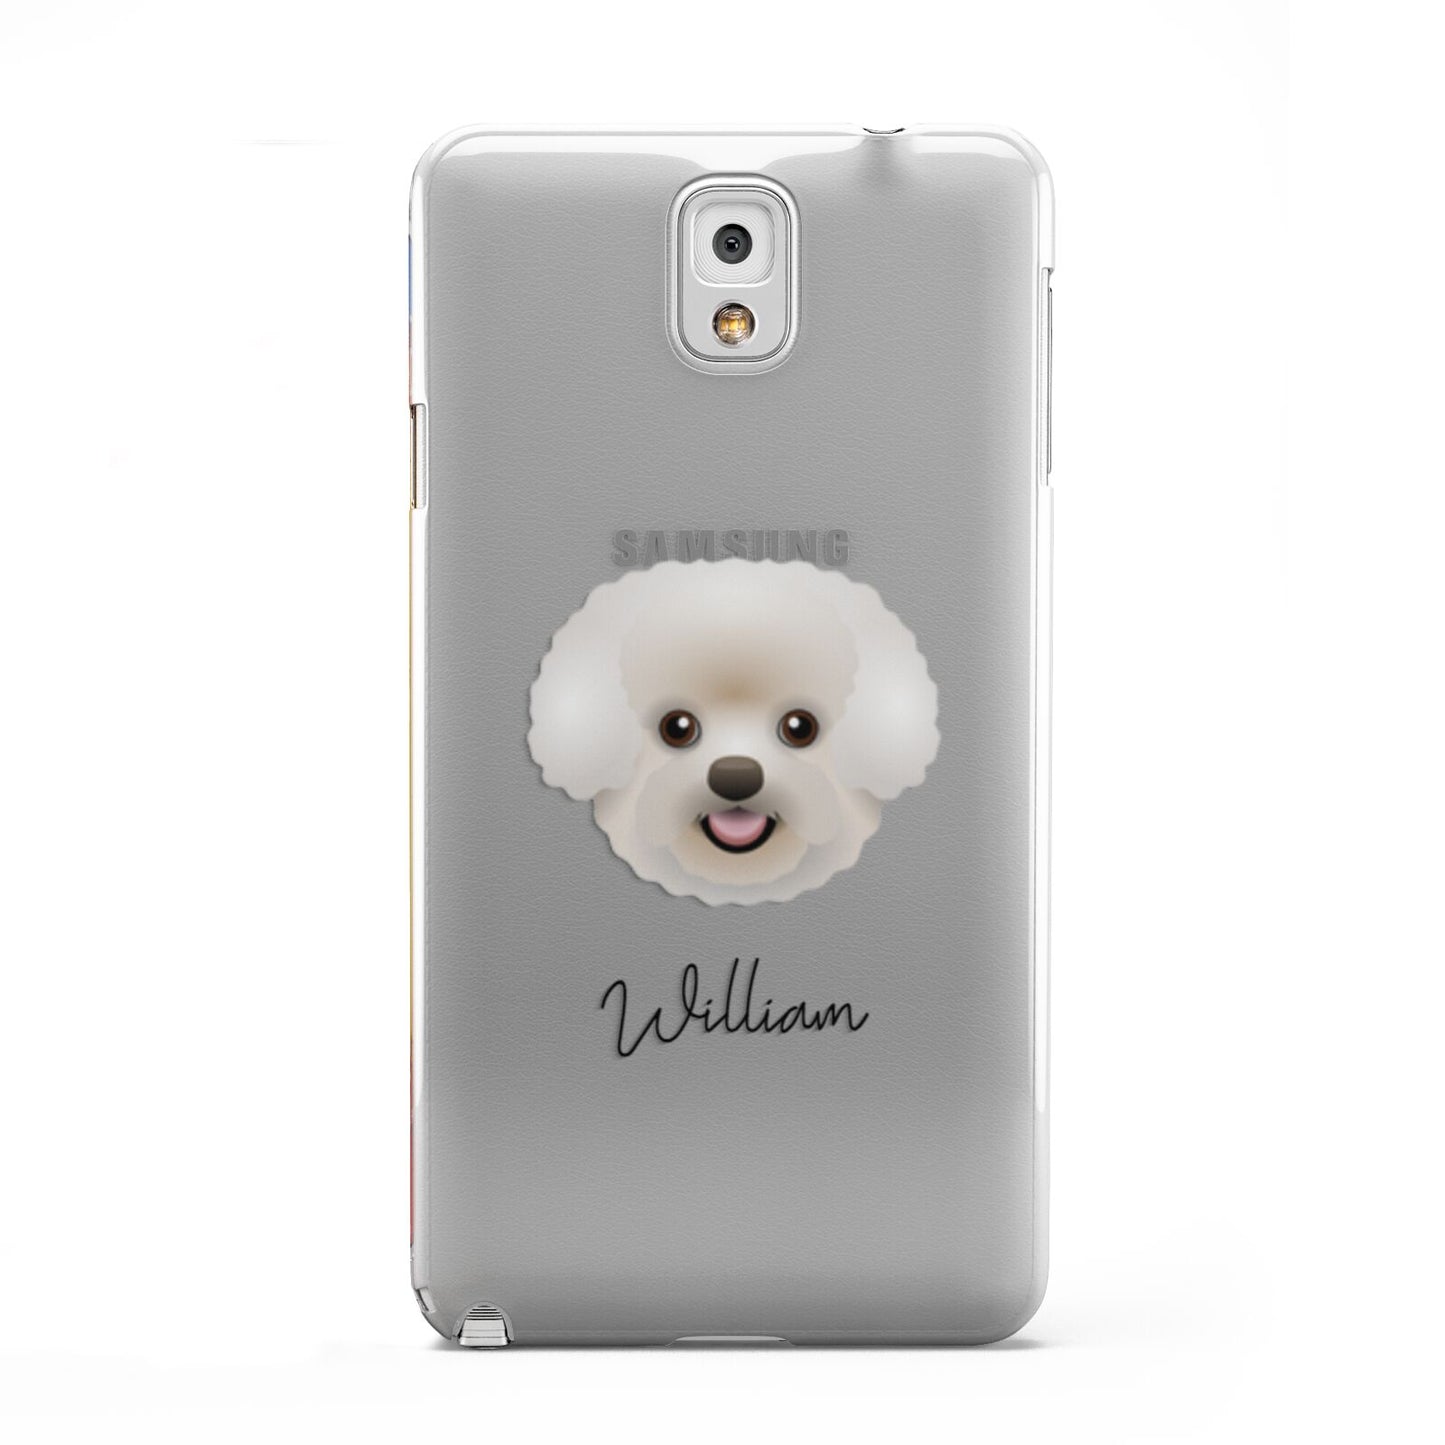 Bichon Frise Personalised Samsung Galaxy Note 3 Case